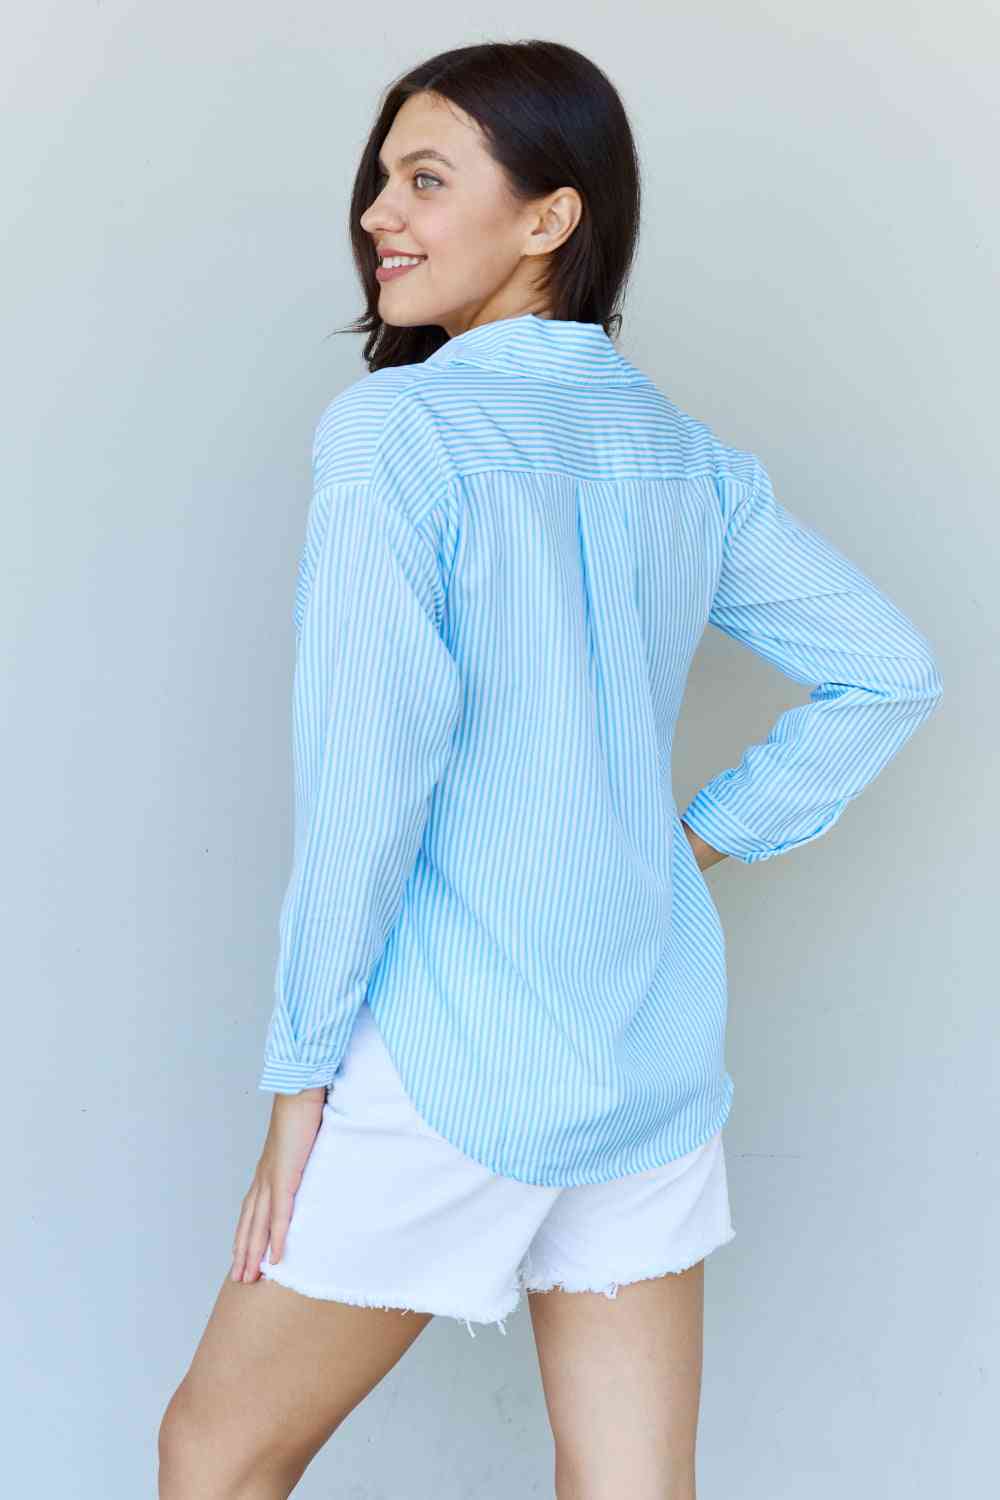 Doublju She Means Business Striped Button Down Shirt Top Print on any thing USA/STOD clothes